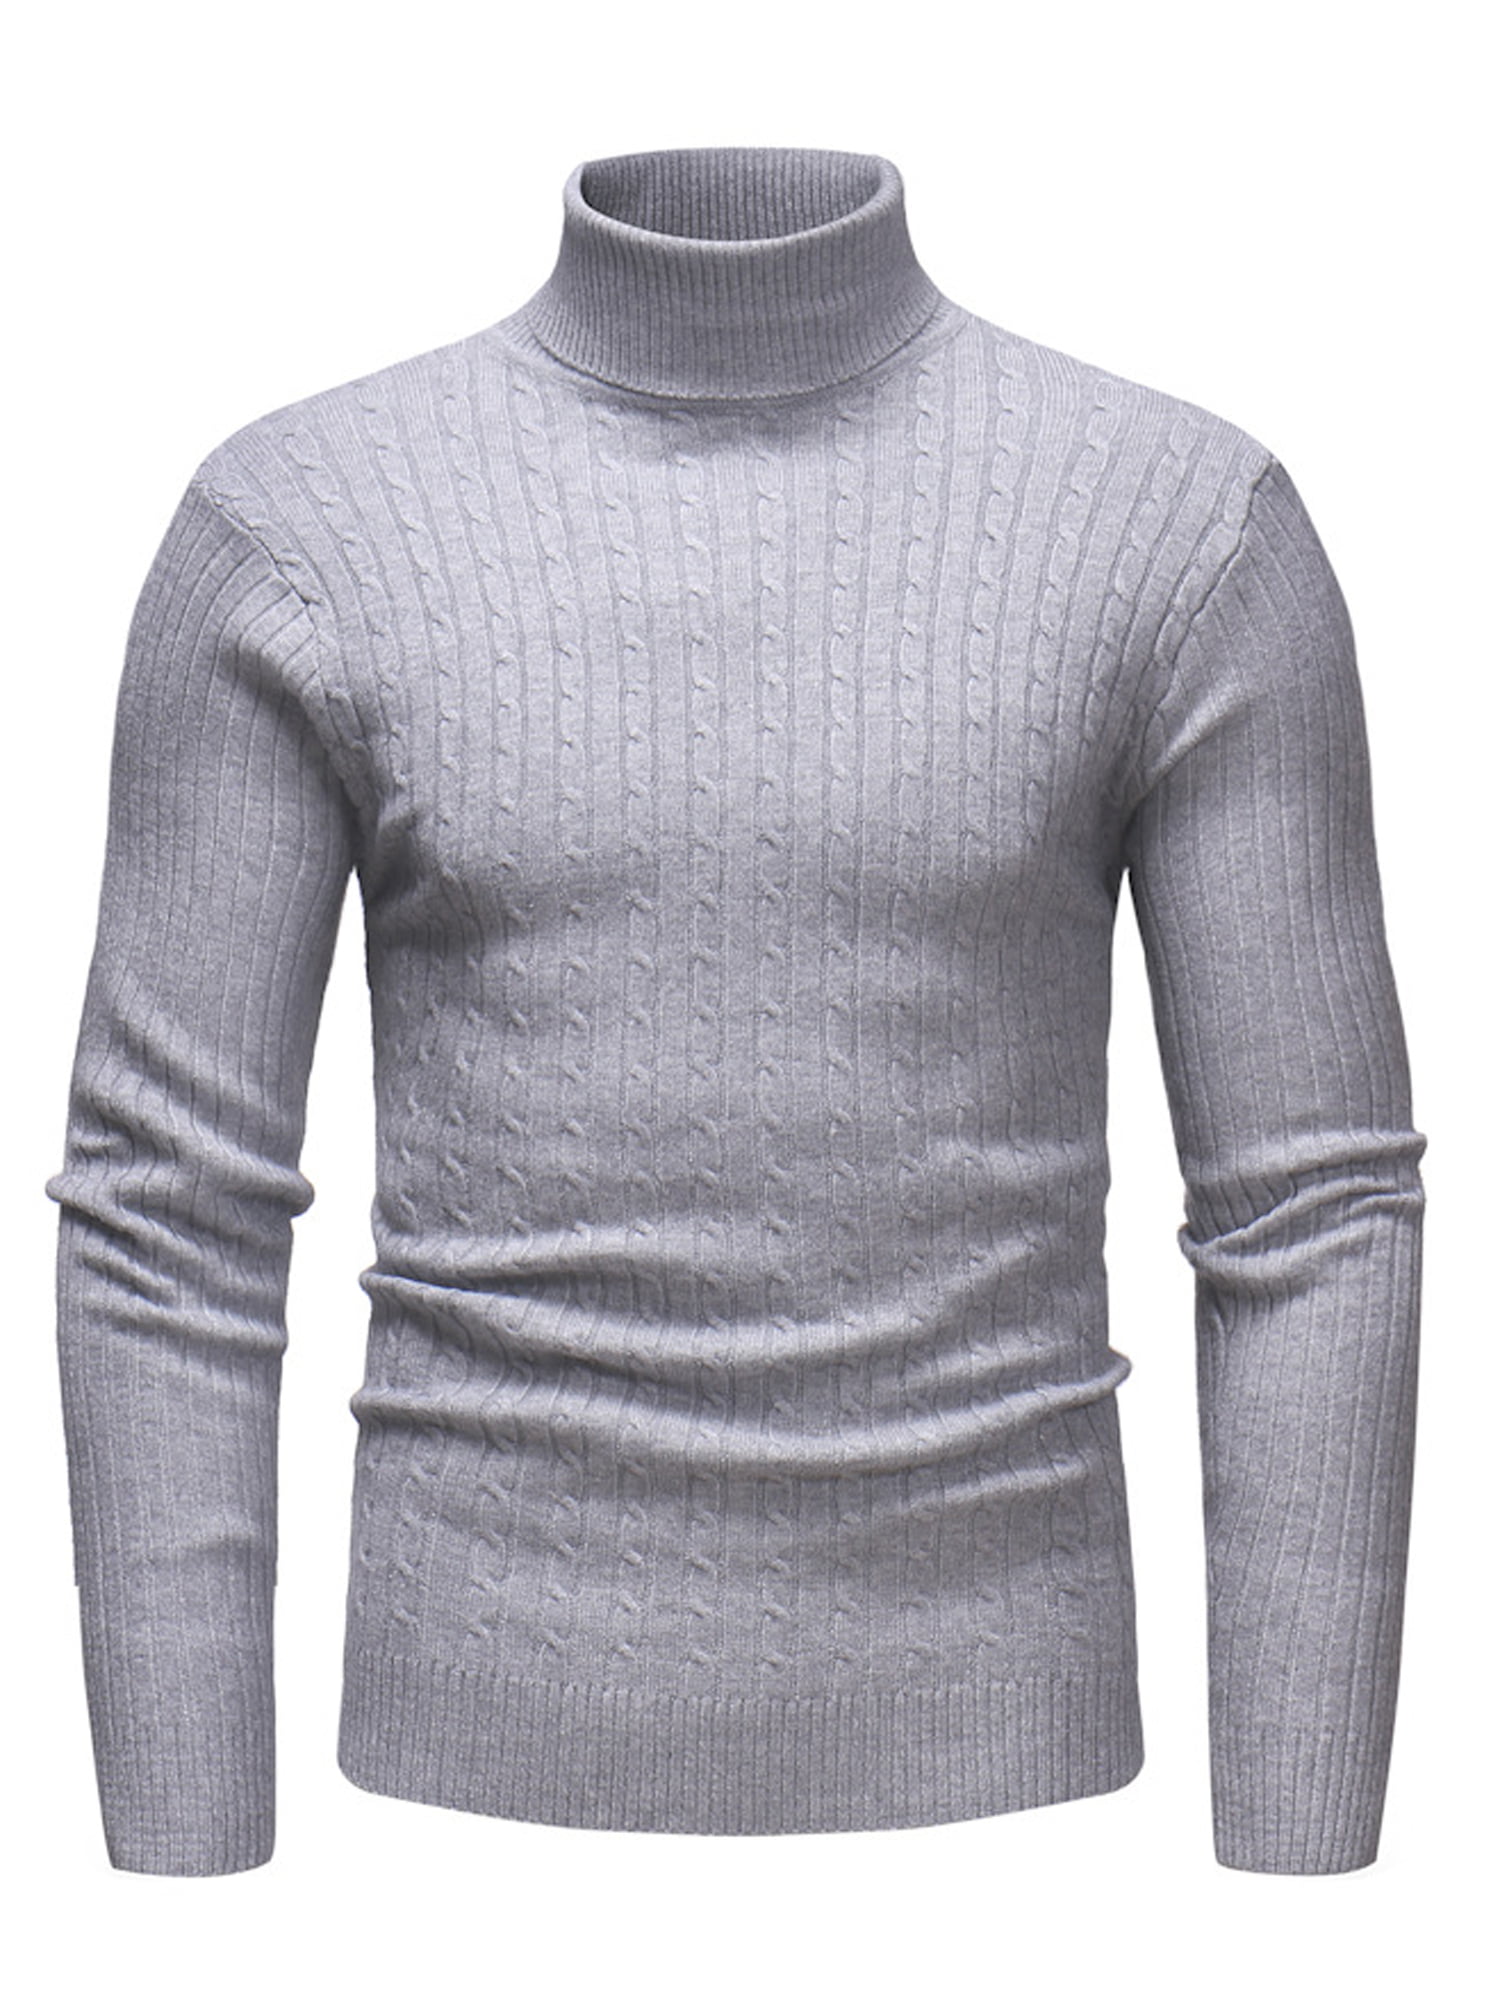 Affordable prices Men's Turtleneck Knitted Sweater Tops Winter Long ...